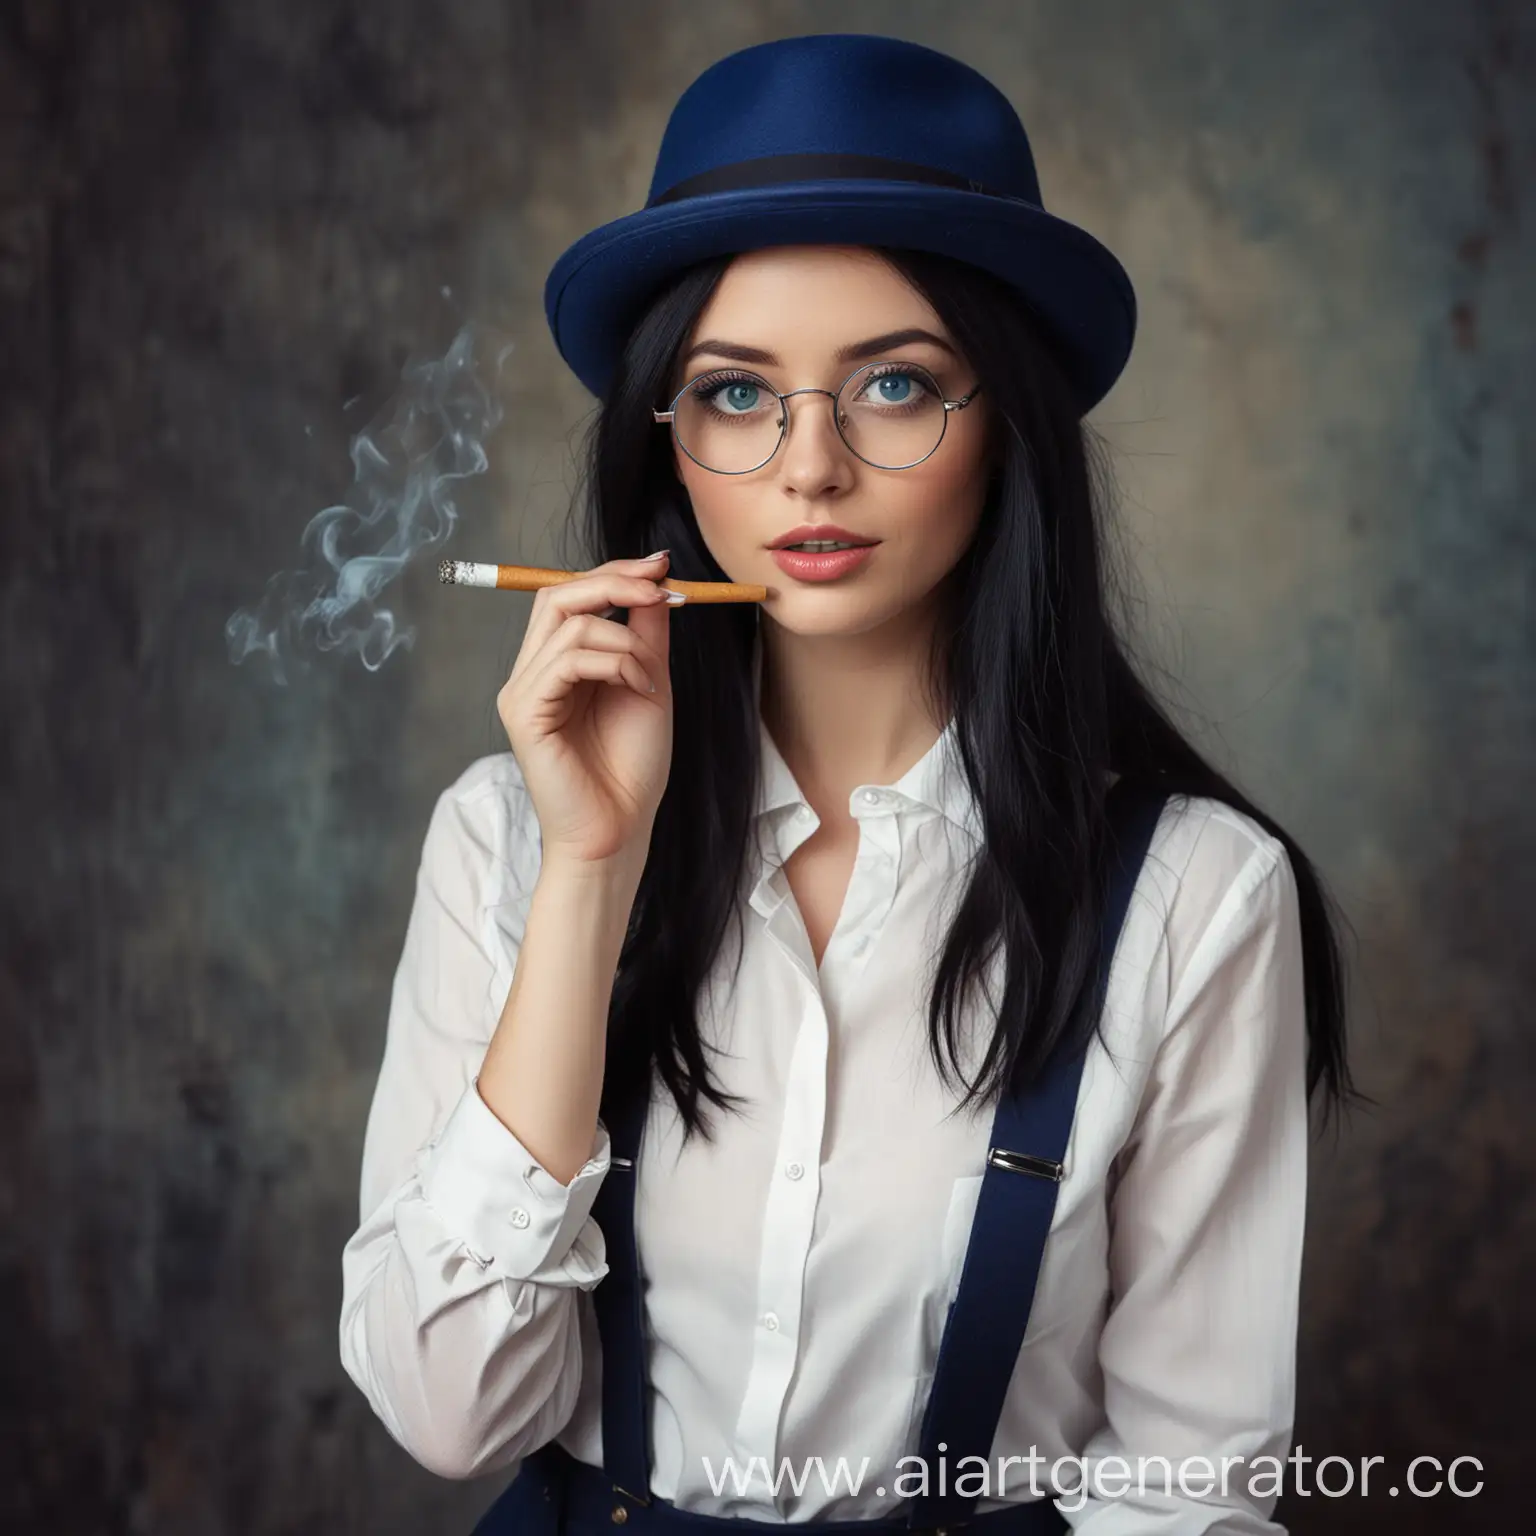 Stylish-Woman-with-Long-Black-Hair-and-Round-Glasses-Smoking-a-Cigarette